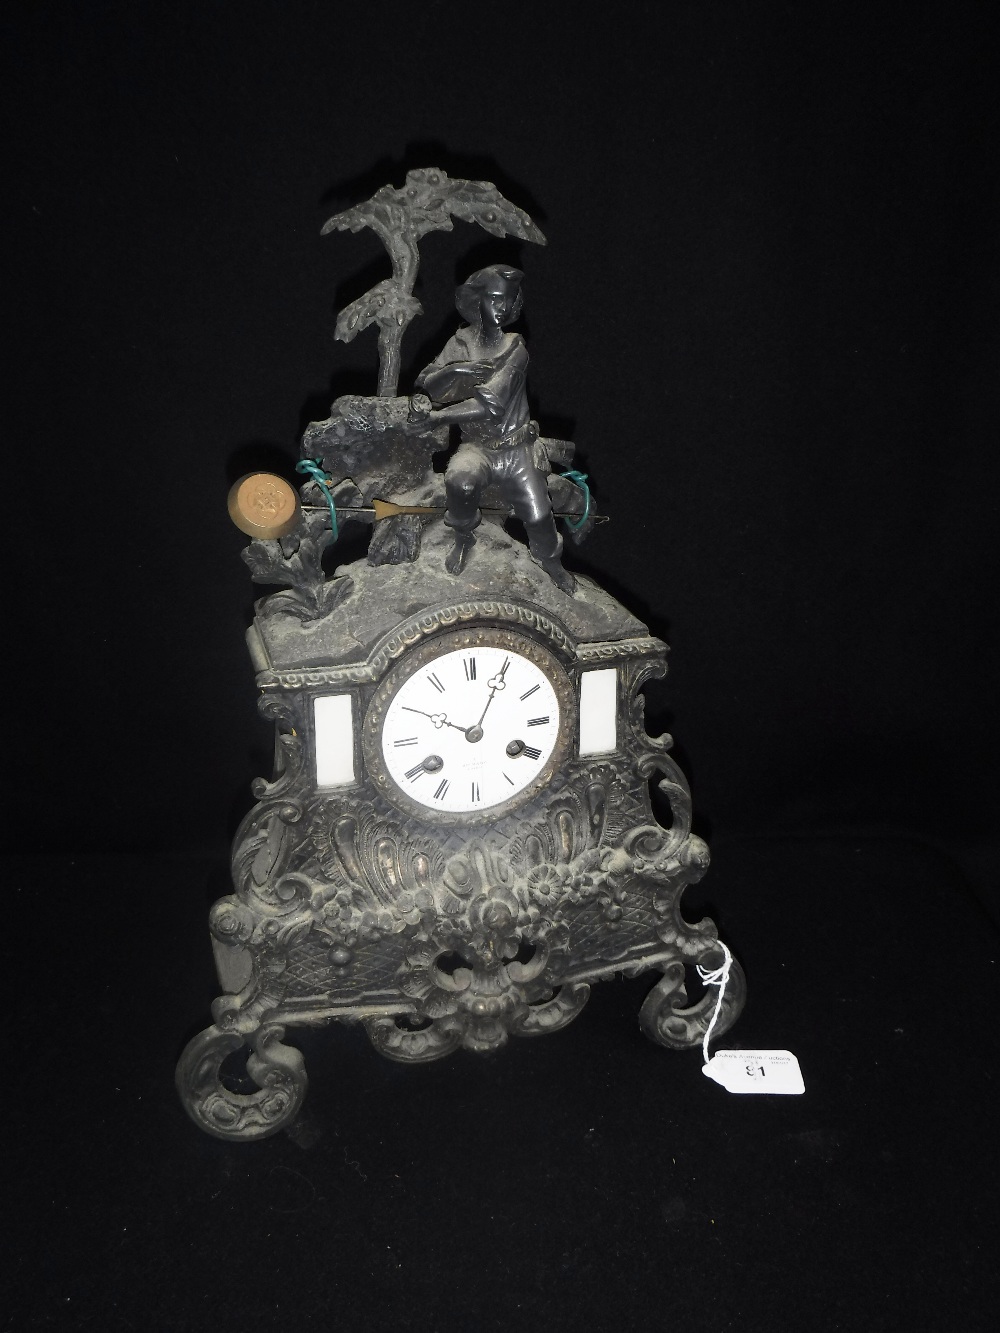 A 19TH CENTURY FRENCH SPELTER CASED MANTEL CLOCK, the enamel face inscribed 'Hry MARC A PARIS' (